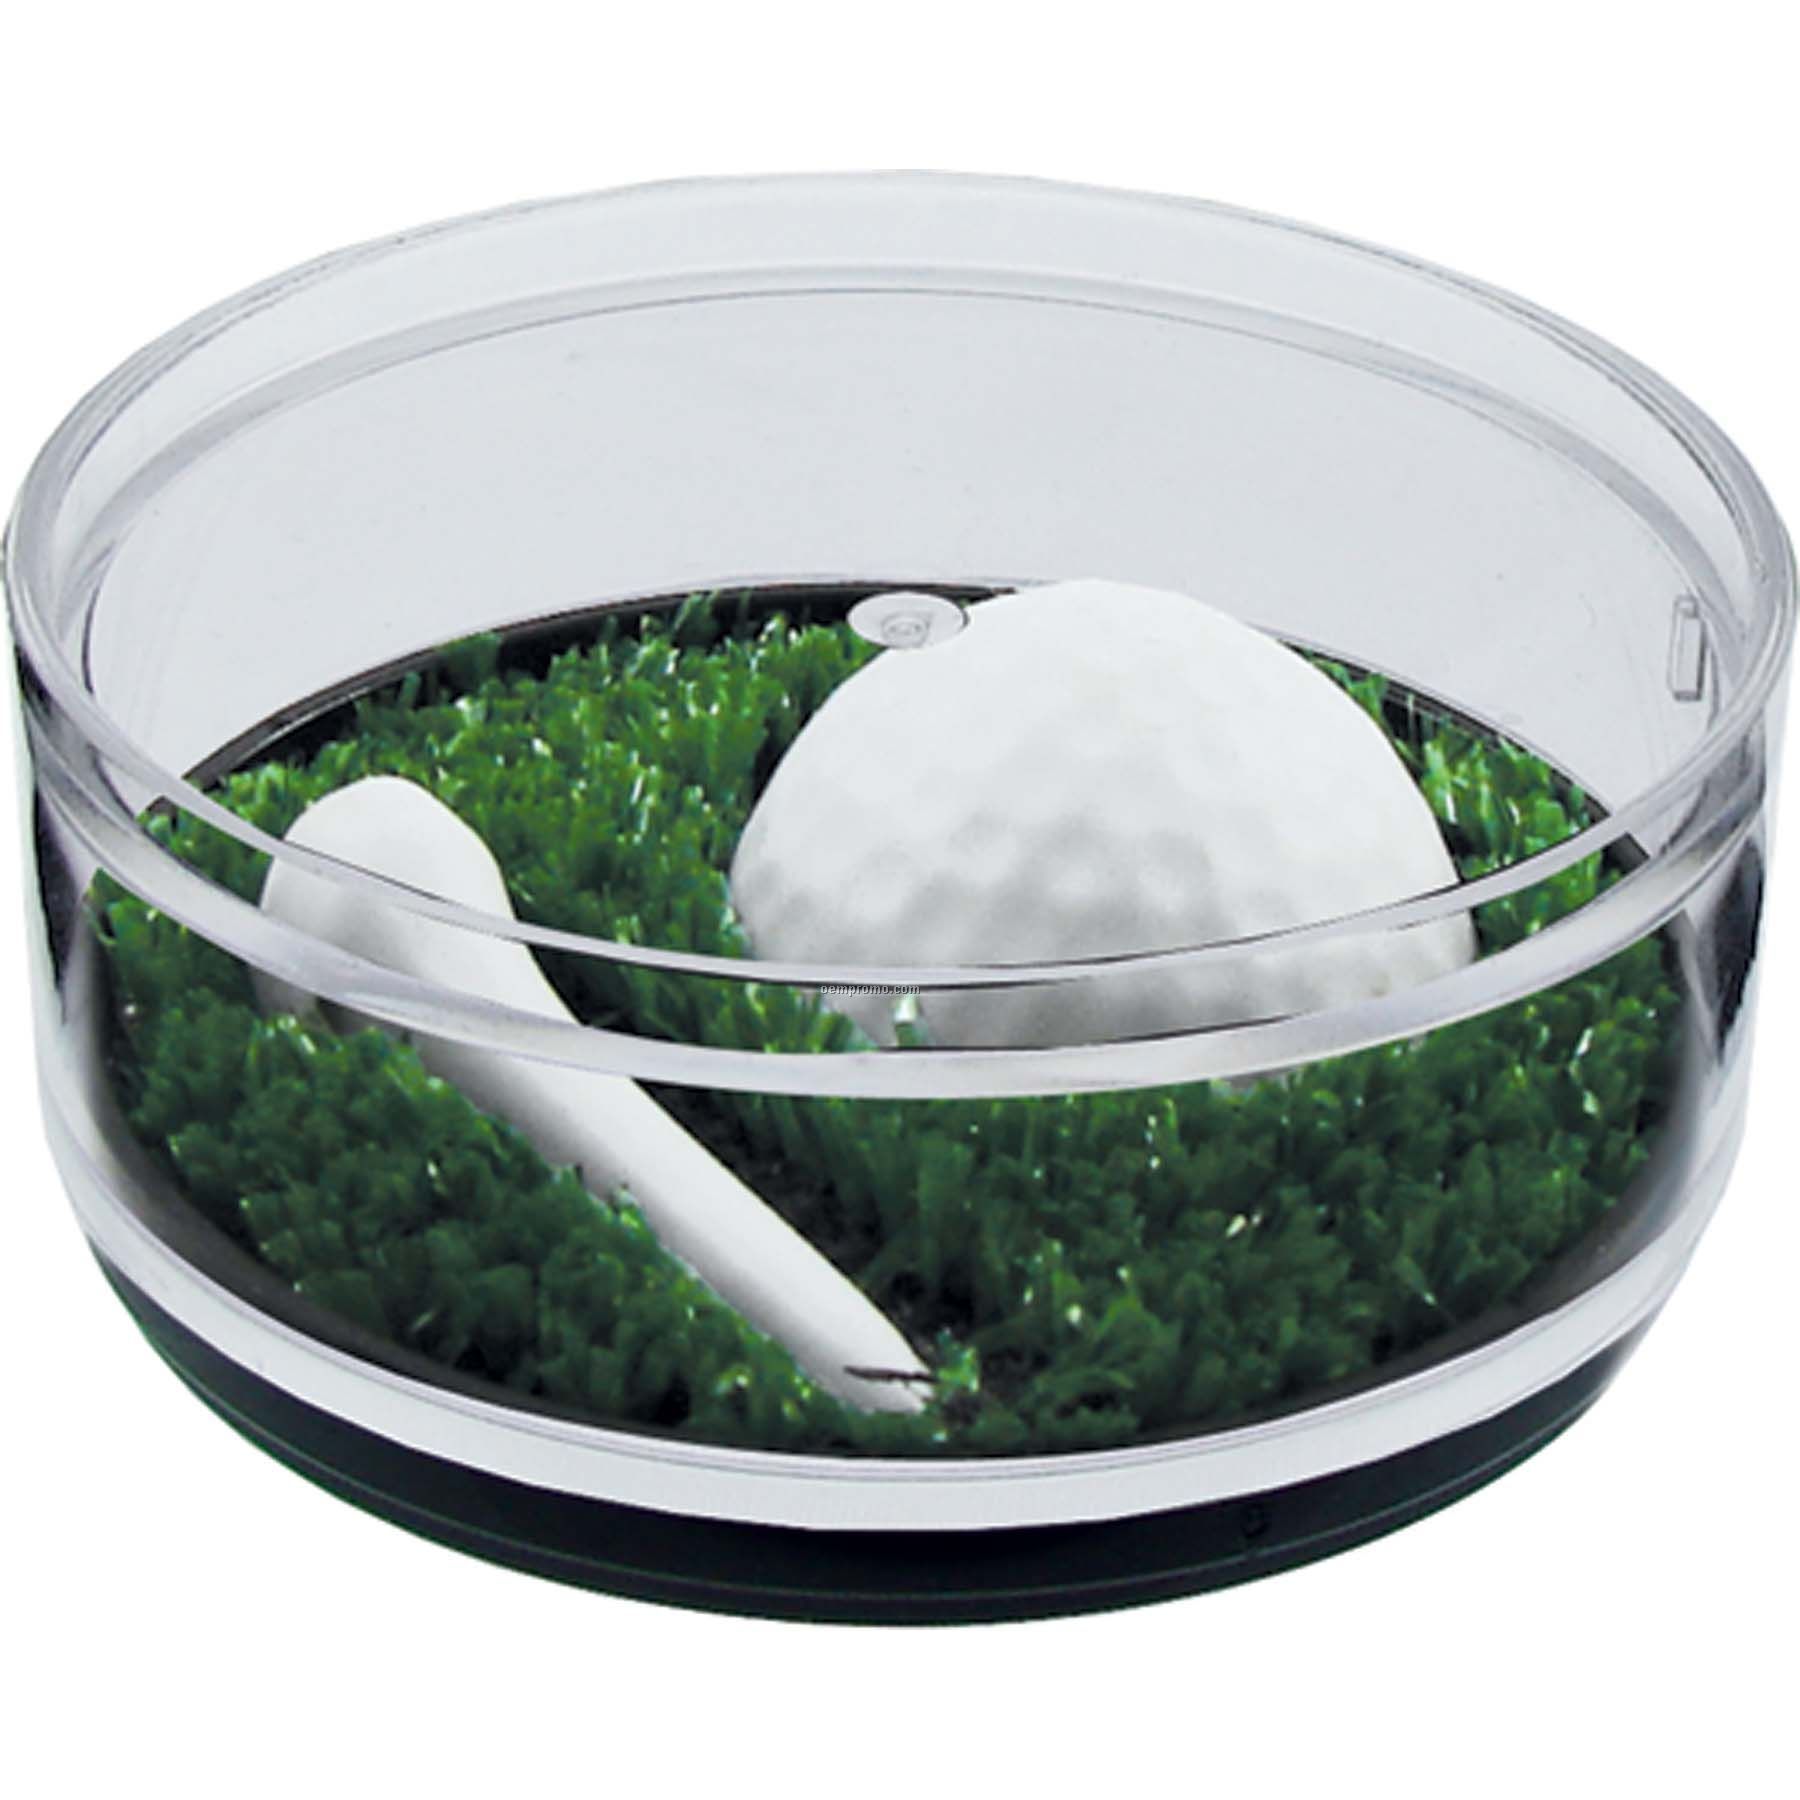 Tee It Up Compartment Coaster Caddy